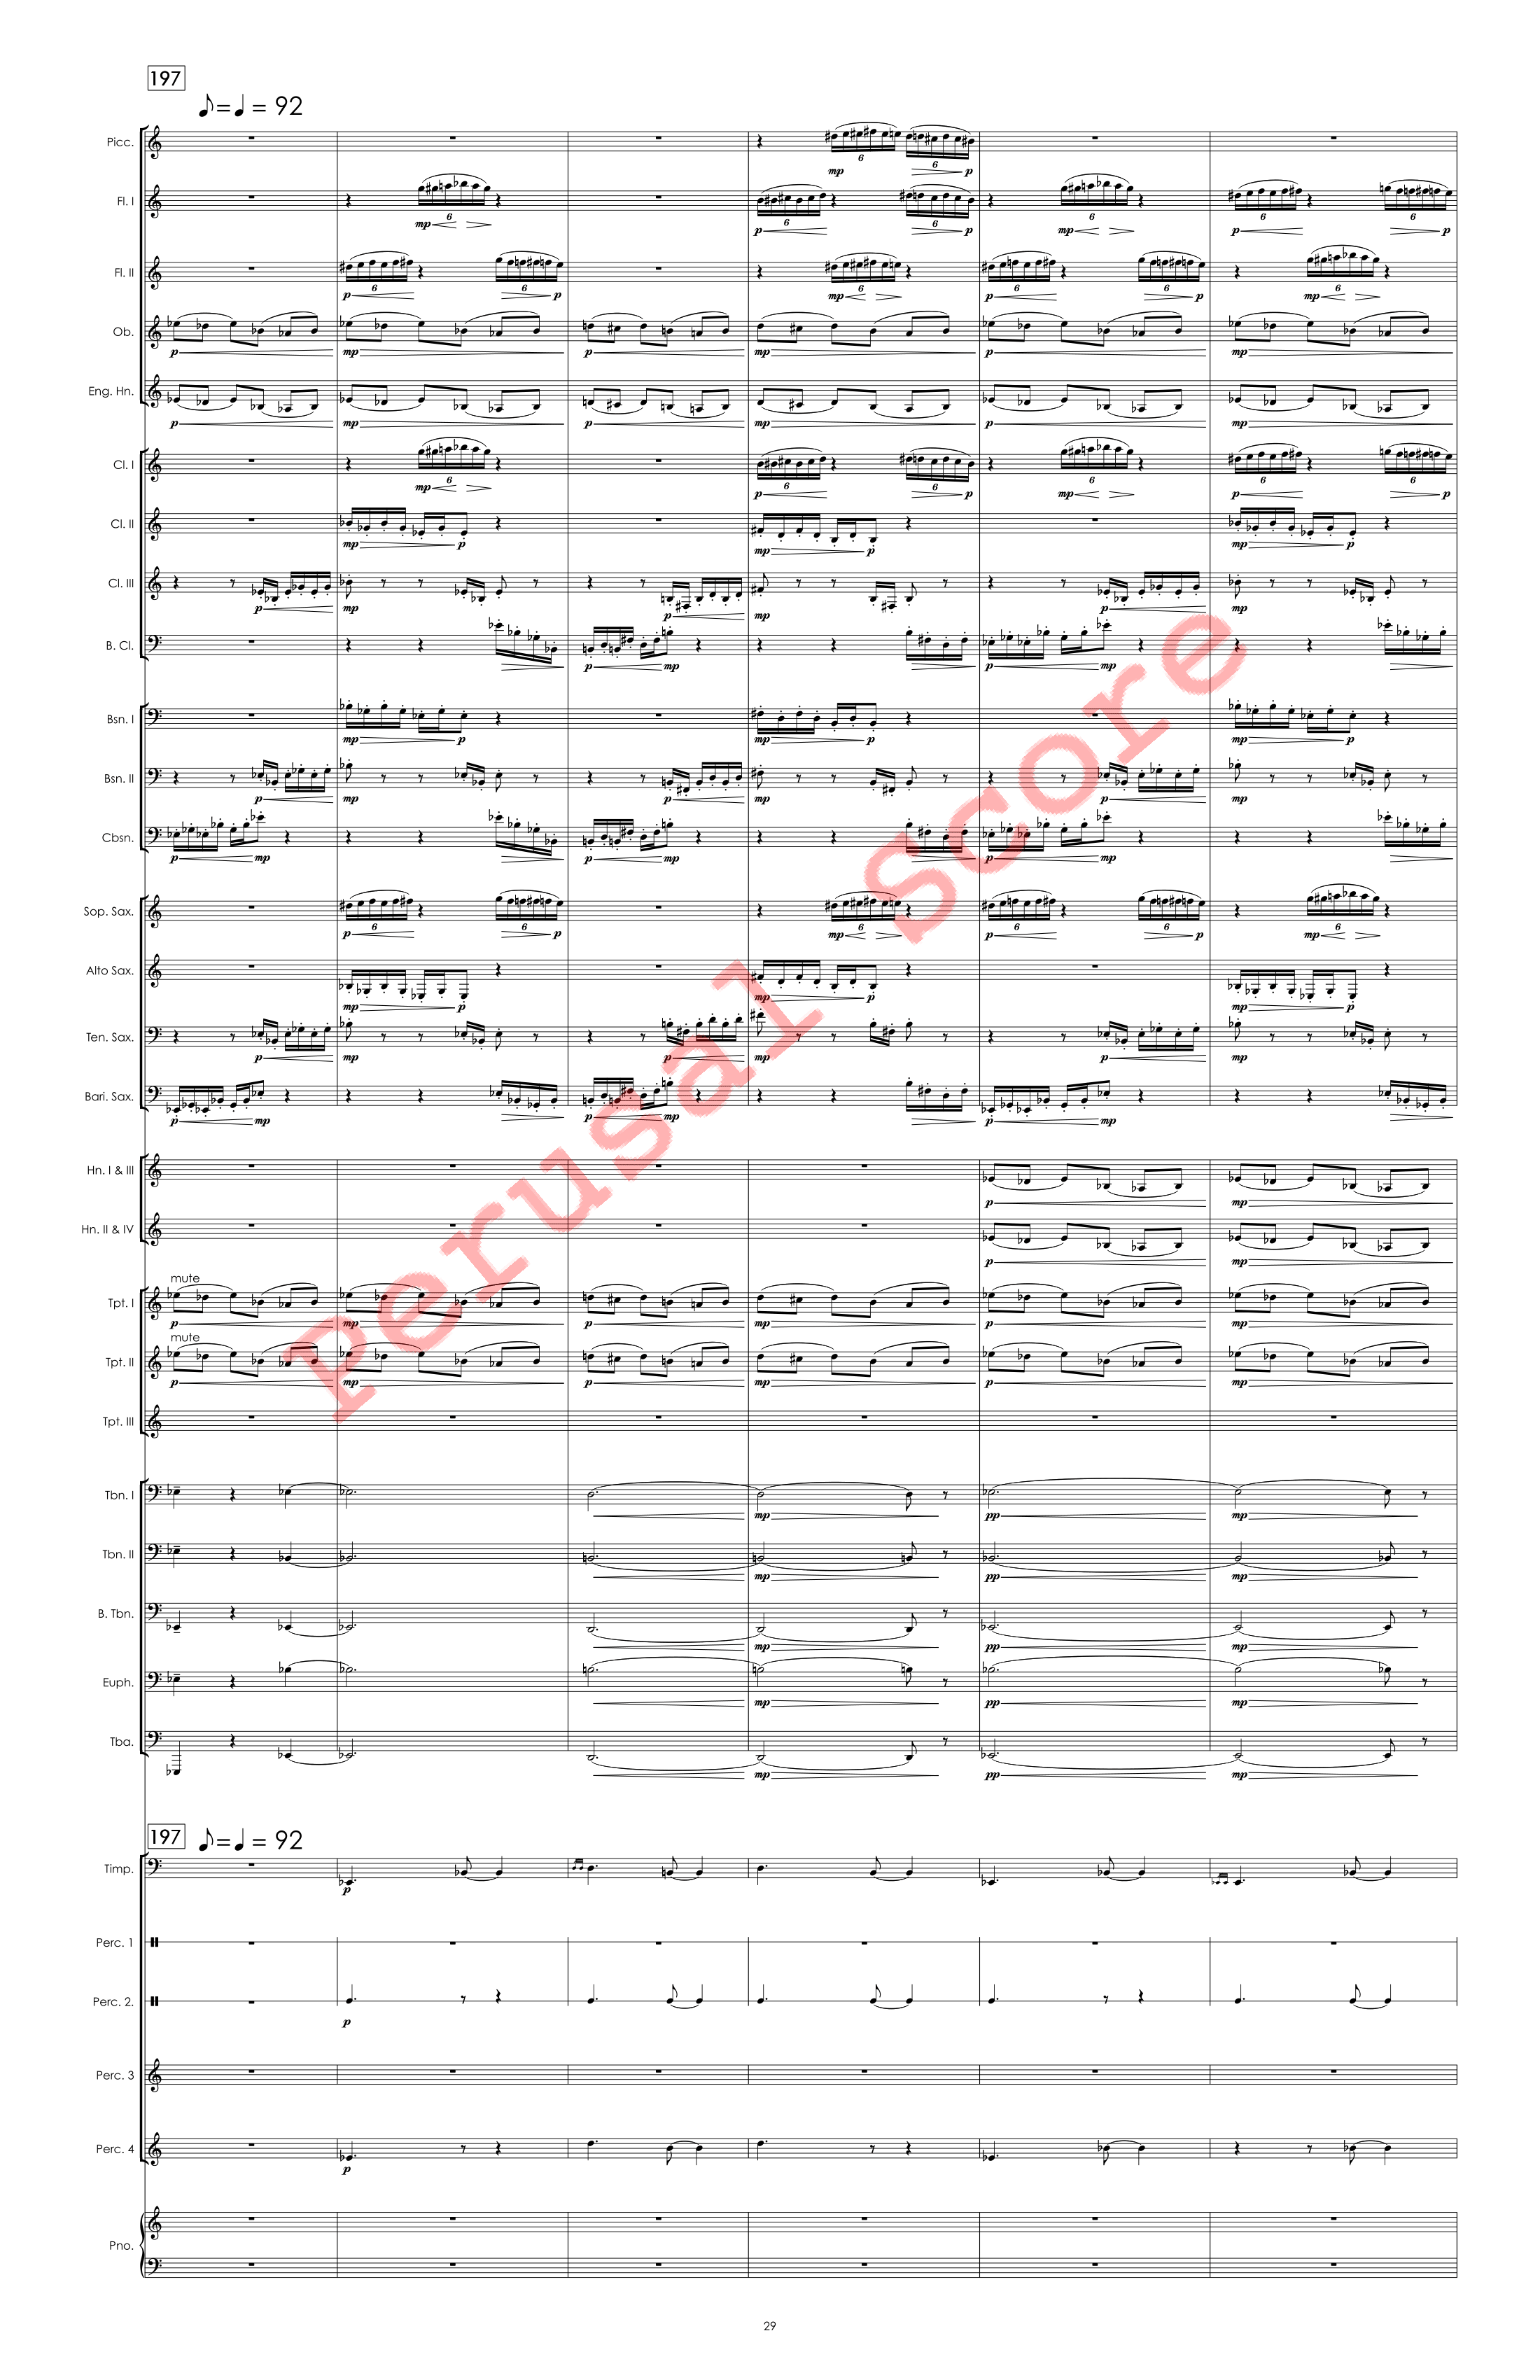 Canadian Folk Song - FINISHED 4.18.23- Full Score perusal score-29.png